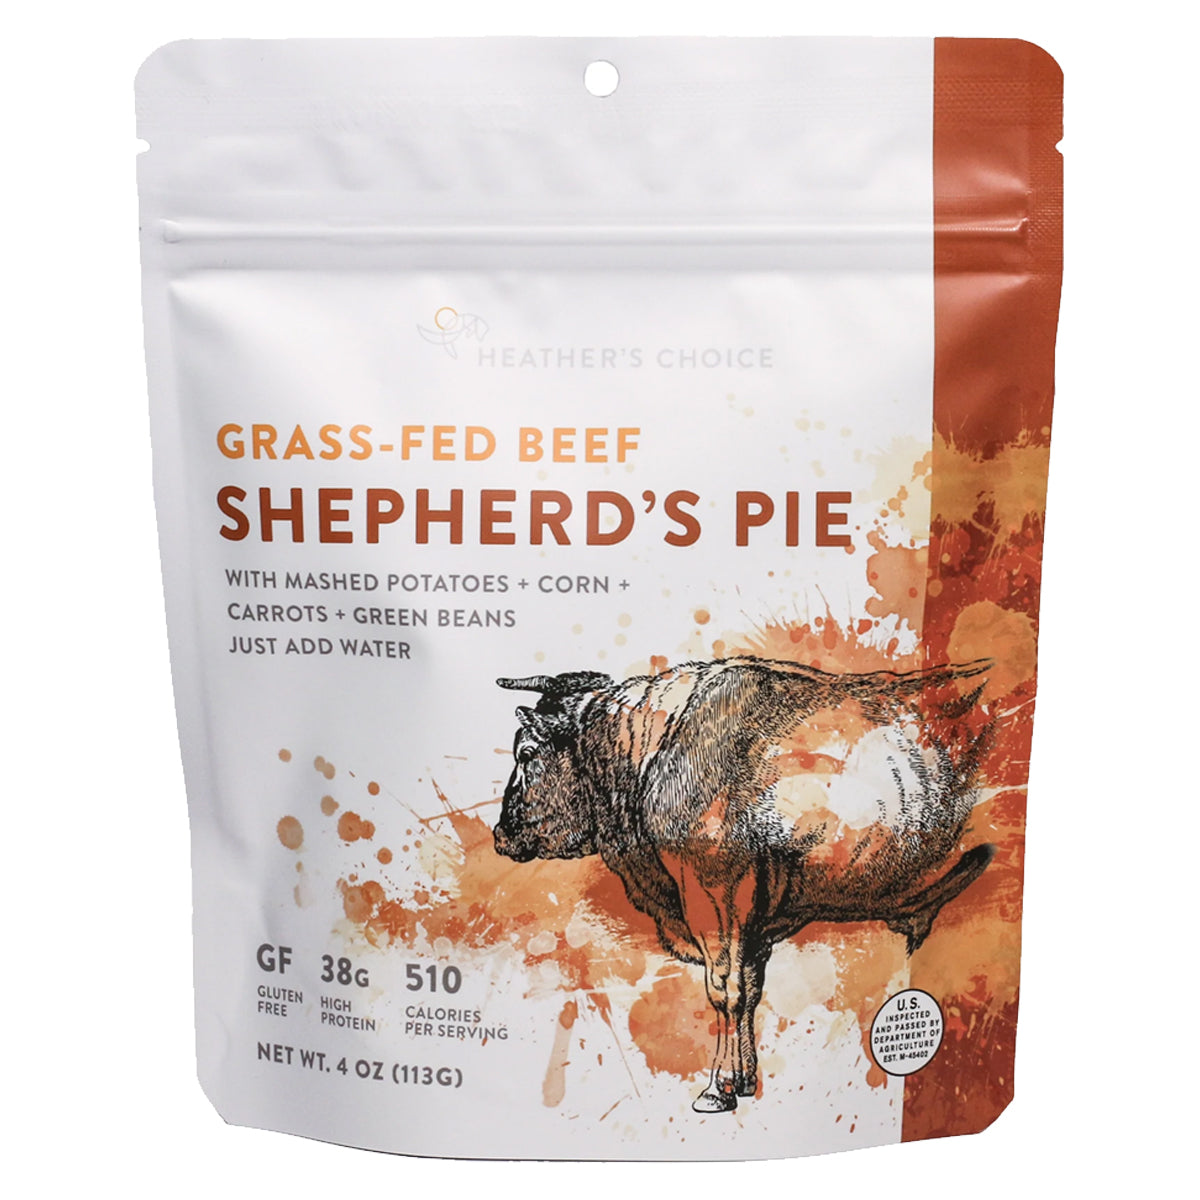 Heather's Choice Shepherd's Pie with Grass-Fed Beef in  by GOHUNT | Heather's Choice - GOHUNT Shop